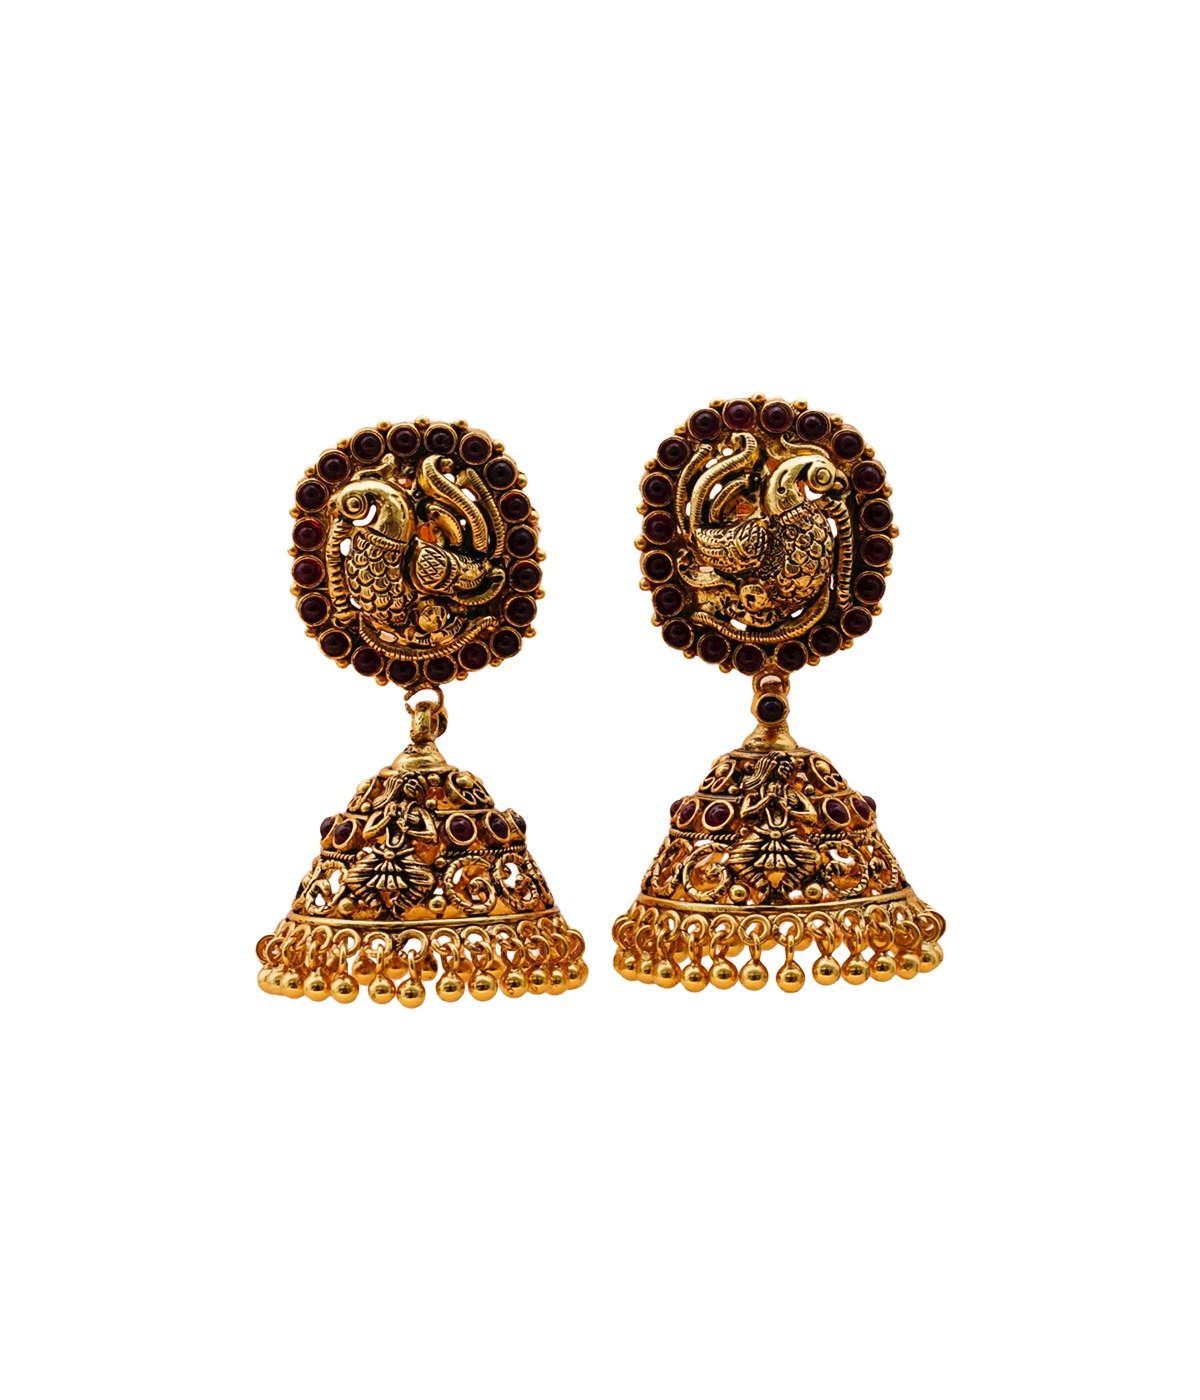 92.5 GOLD POLISHED RED STONE STUDDED PEACOCK DESIGN JHUMKI